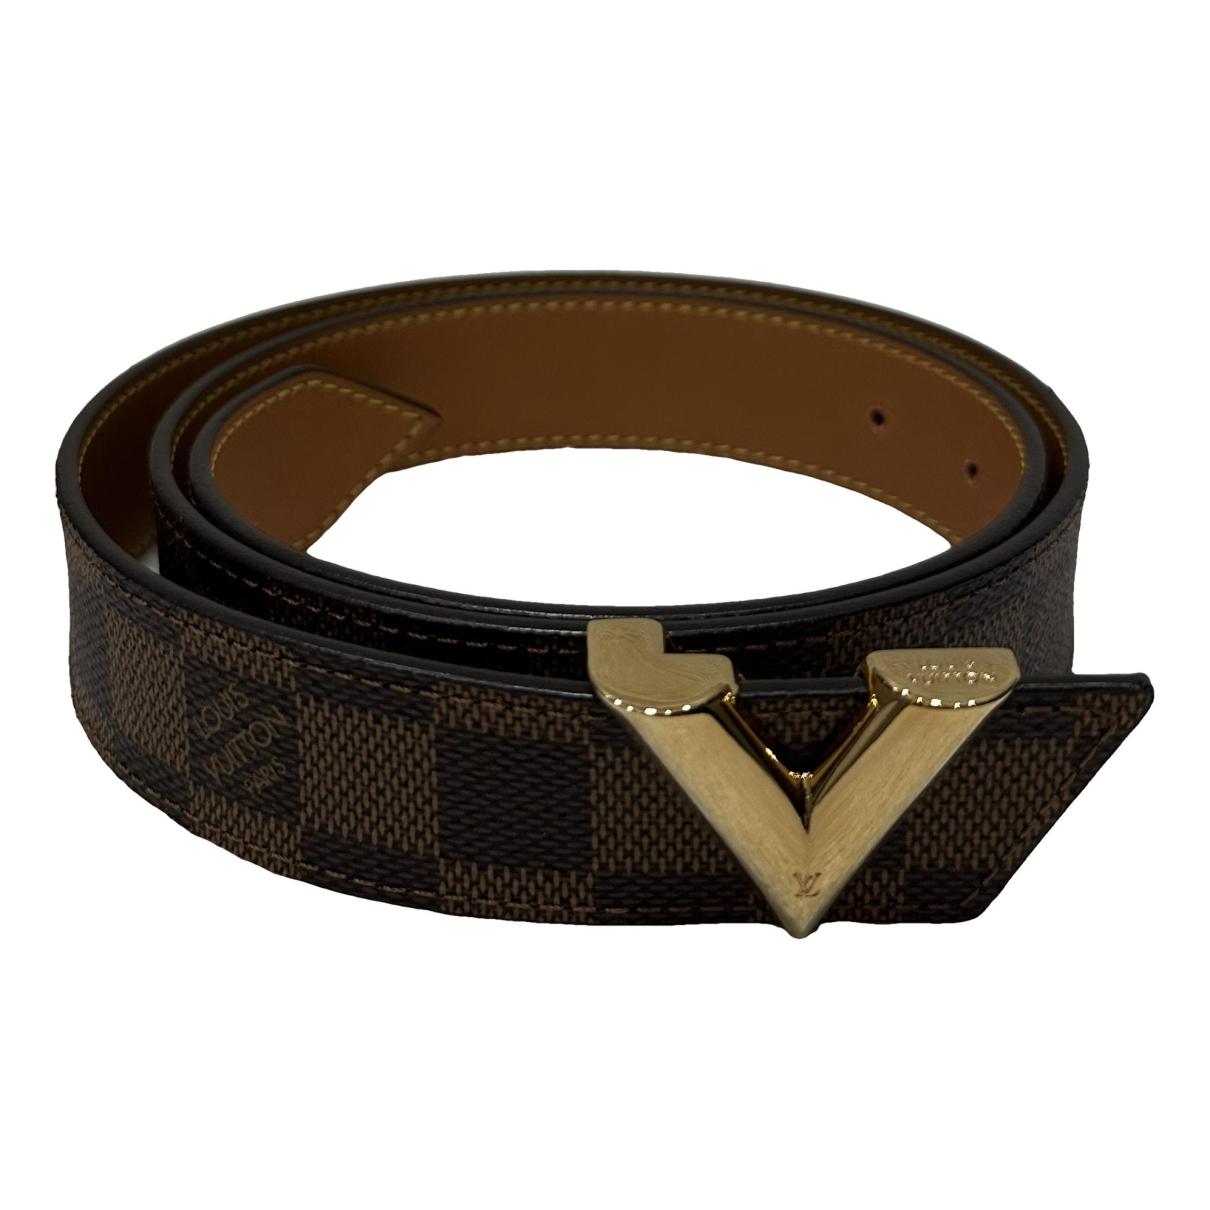 Initiales cloth belt Louis Vuitton Brown size 85 cm in Cloth - 23914810